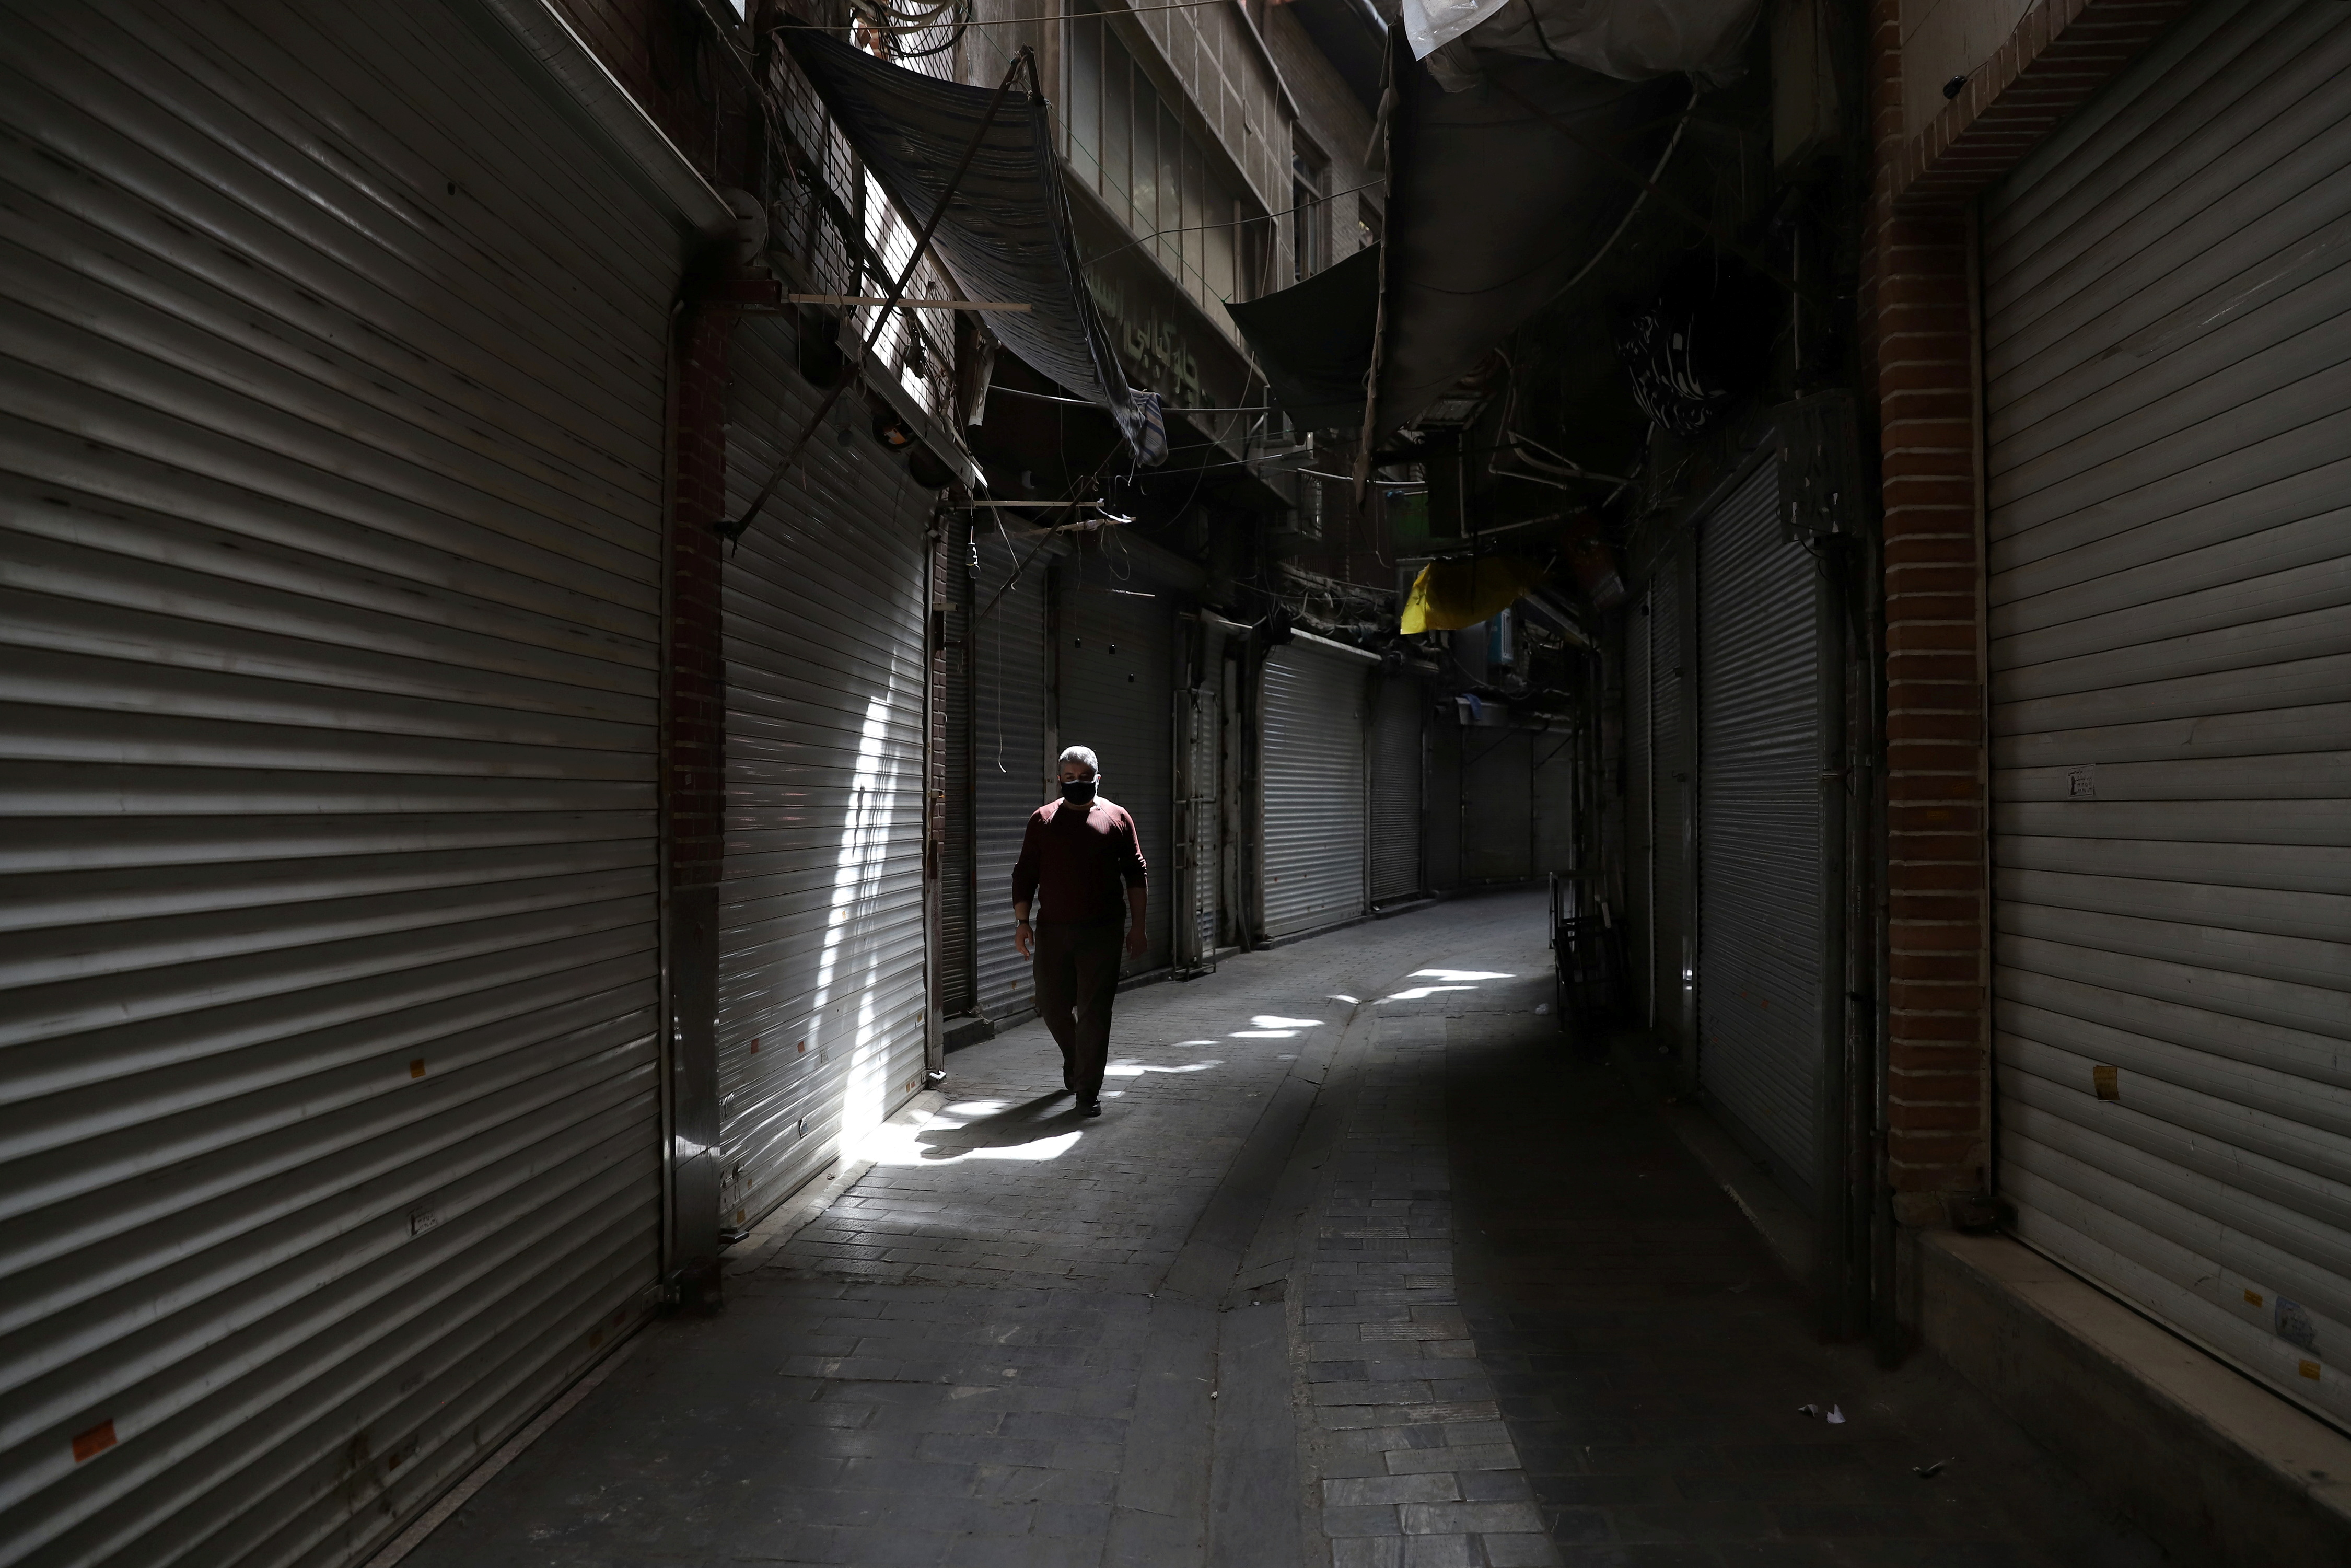 A man walks next to closed shops of Tehran Bazaar following the tightening of restrictions to curb the surge of COVID-19 cases, Tehran, Iran April 10, 2021.